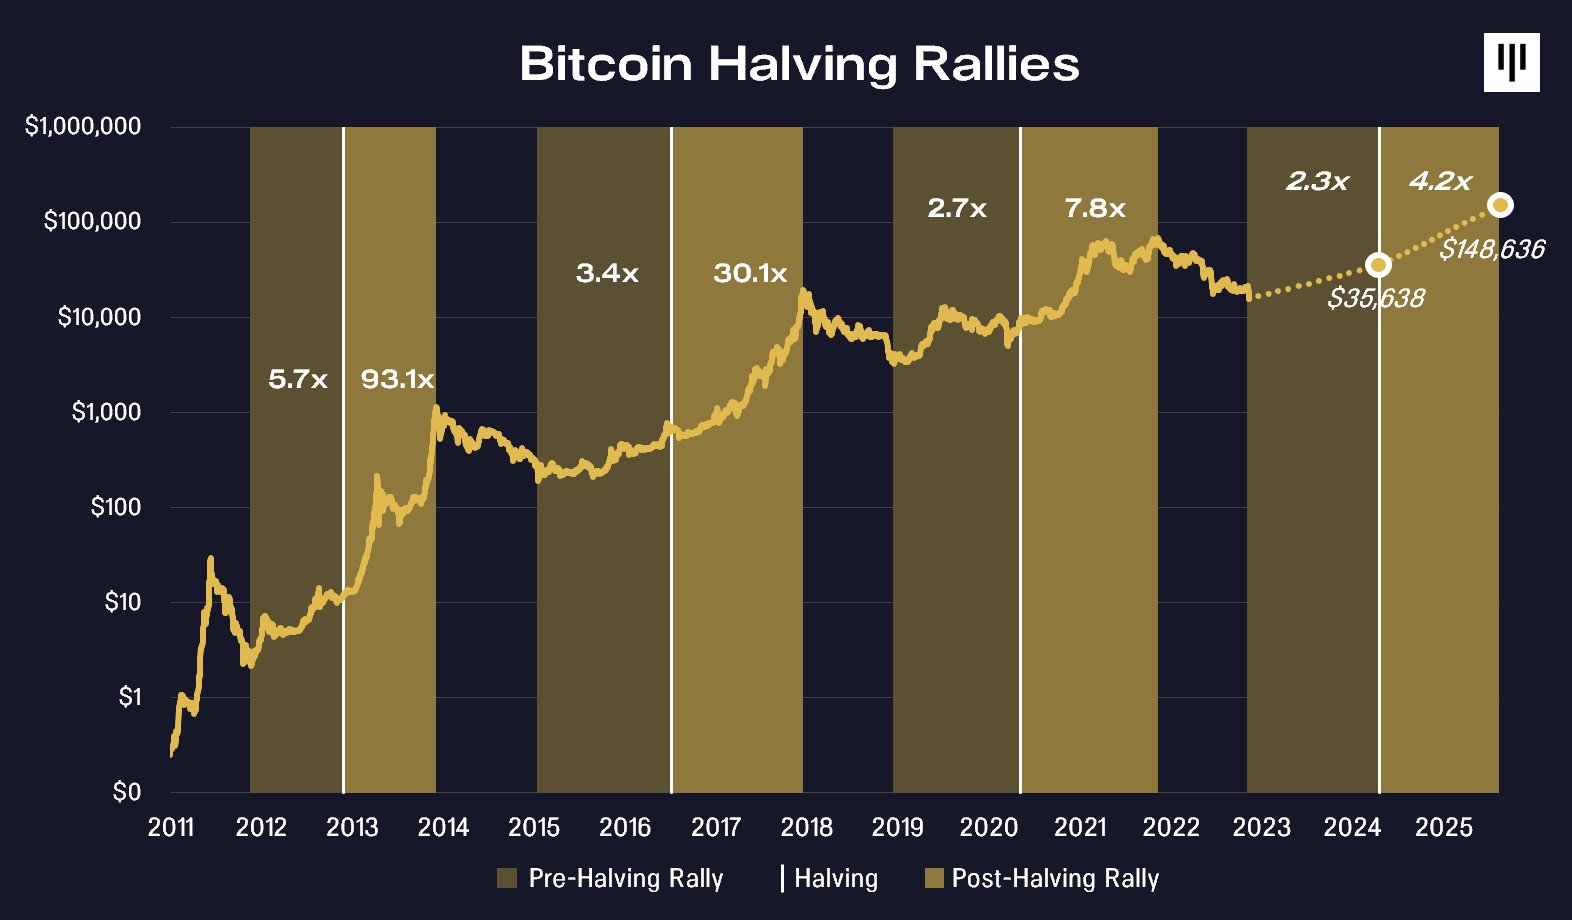 Dan Morehead on Twitter "The next bitcoin halving is expected in